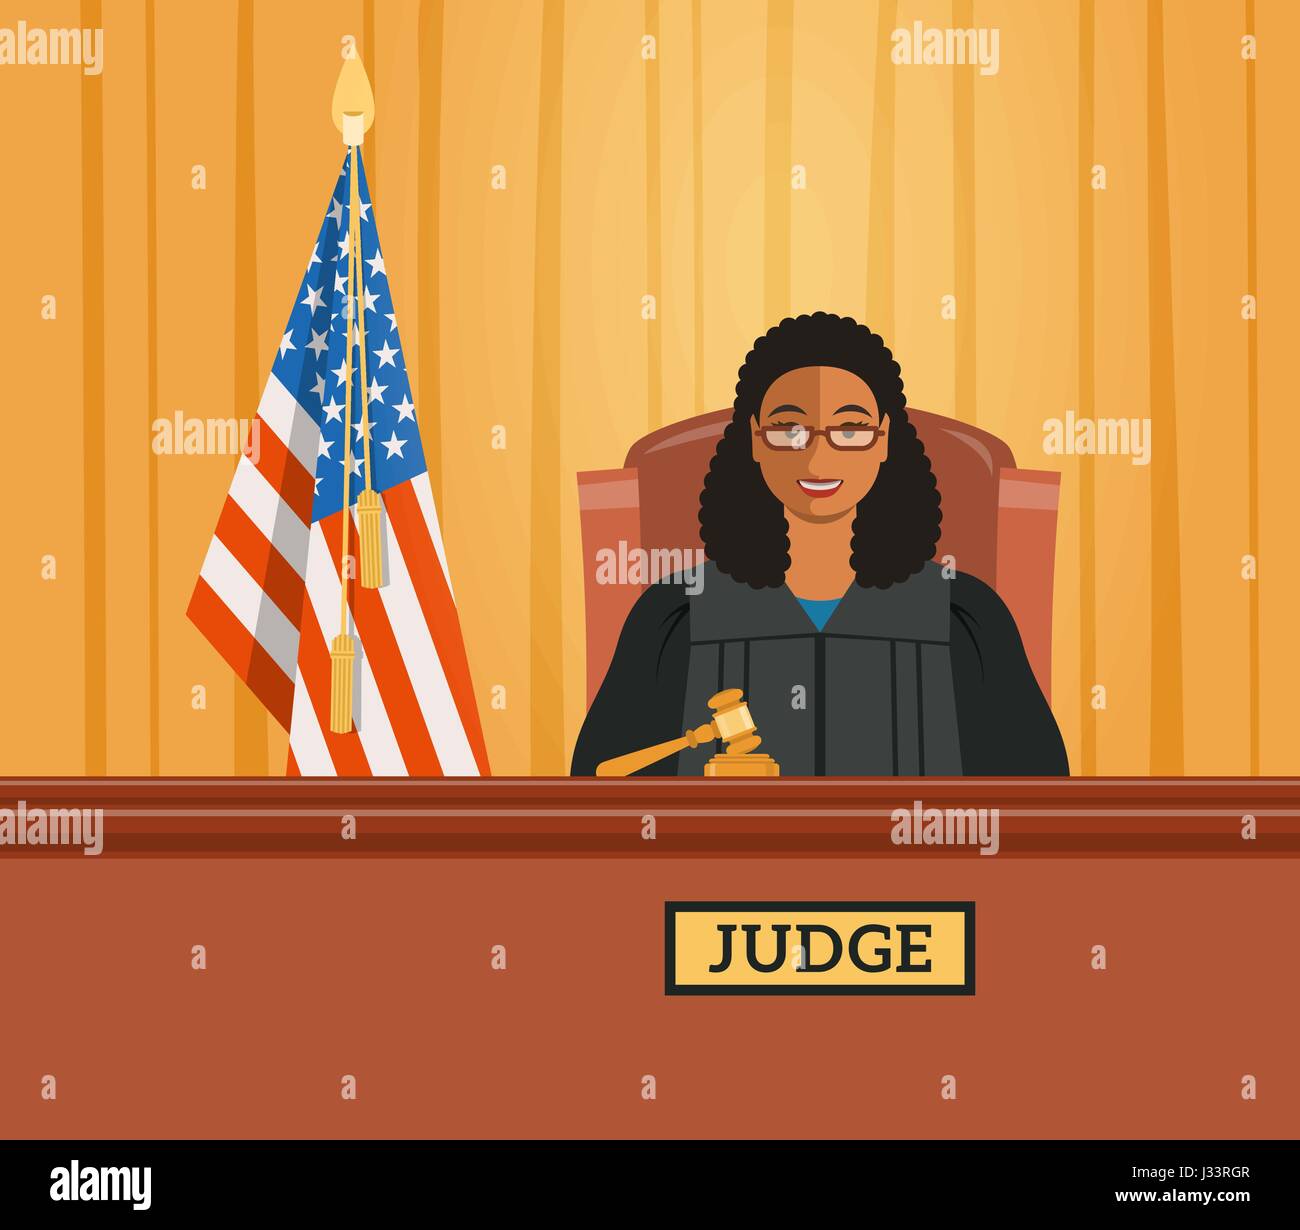 Judge black woman in courtroom at tribunal with gavel and american flag. Judicial cartoon background. Civil and criminal cases public trial. Vector fl Stock Vector